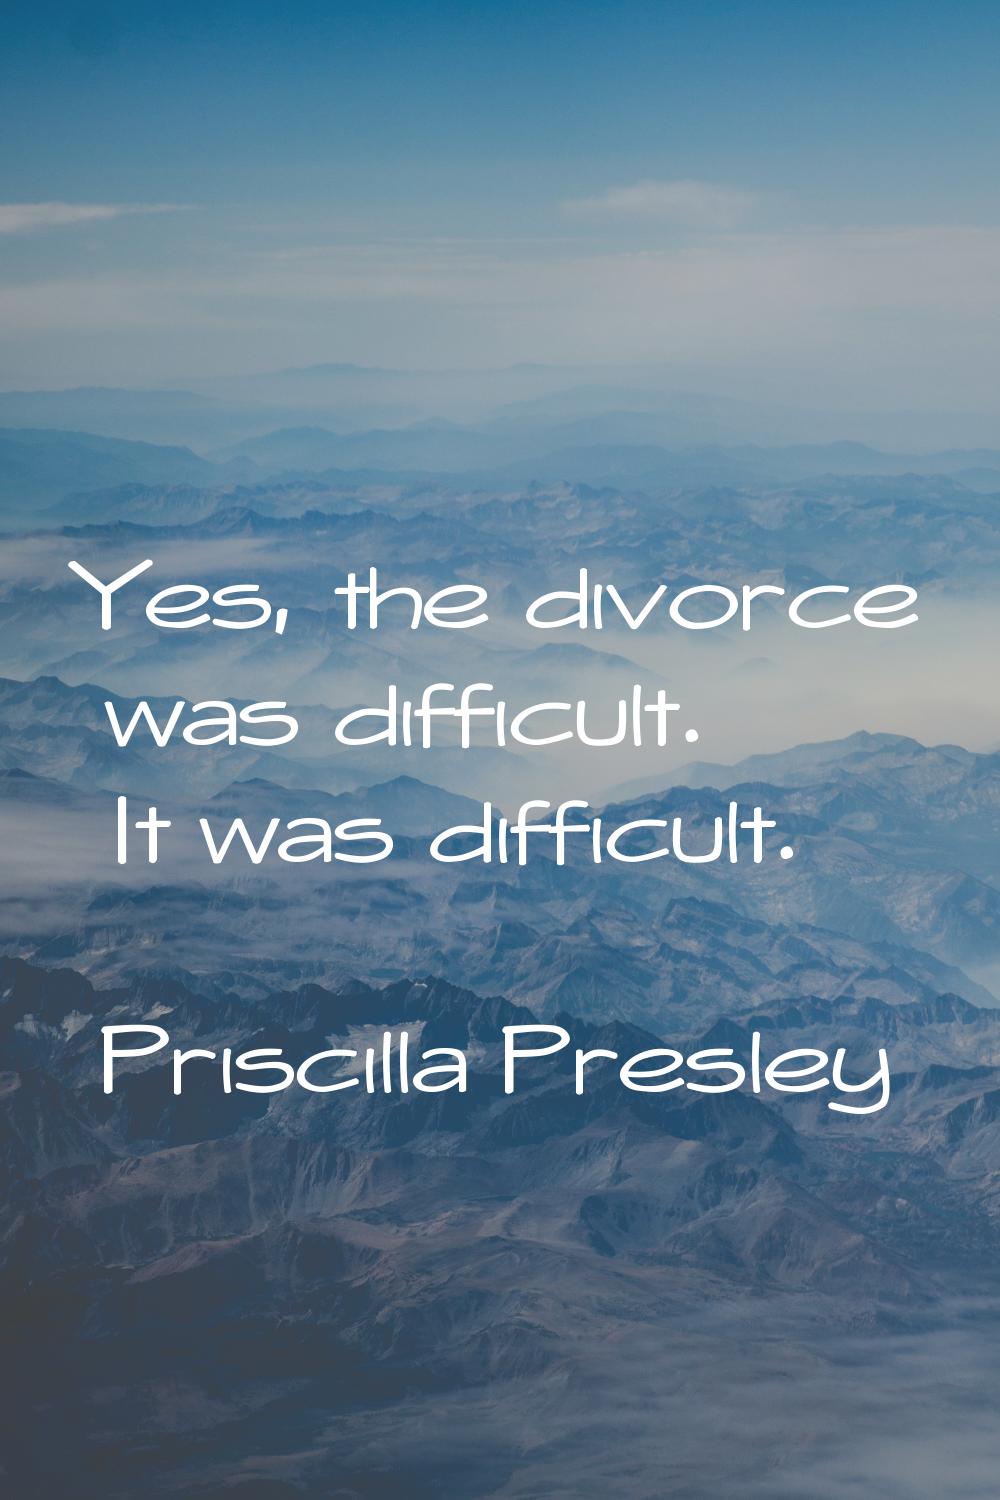 Yes, the divorce was difficult. It was difficult.